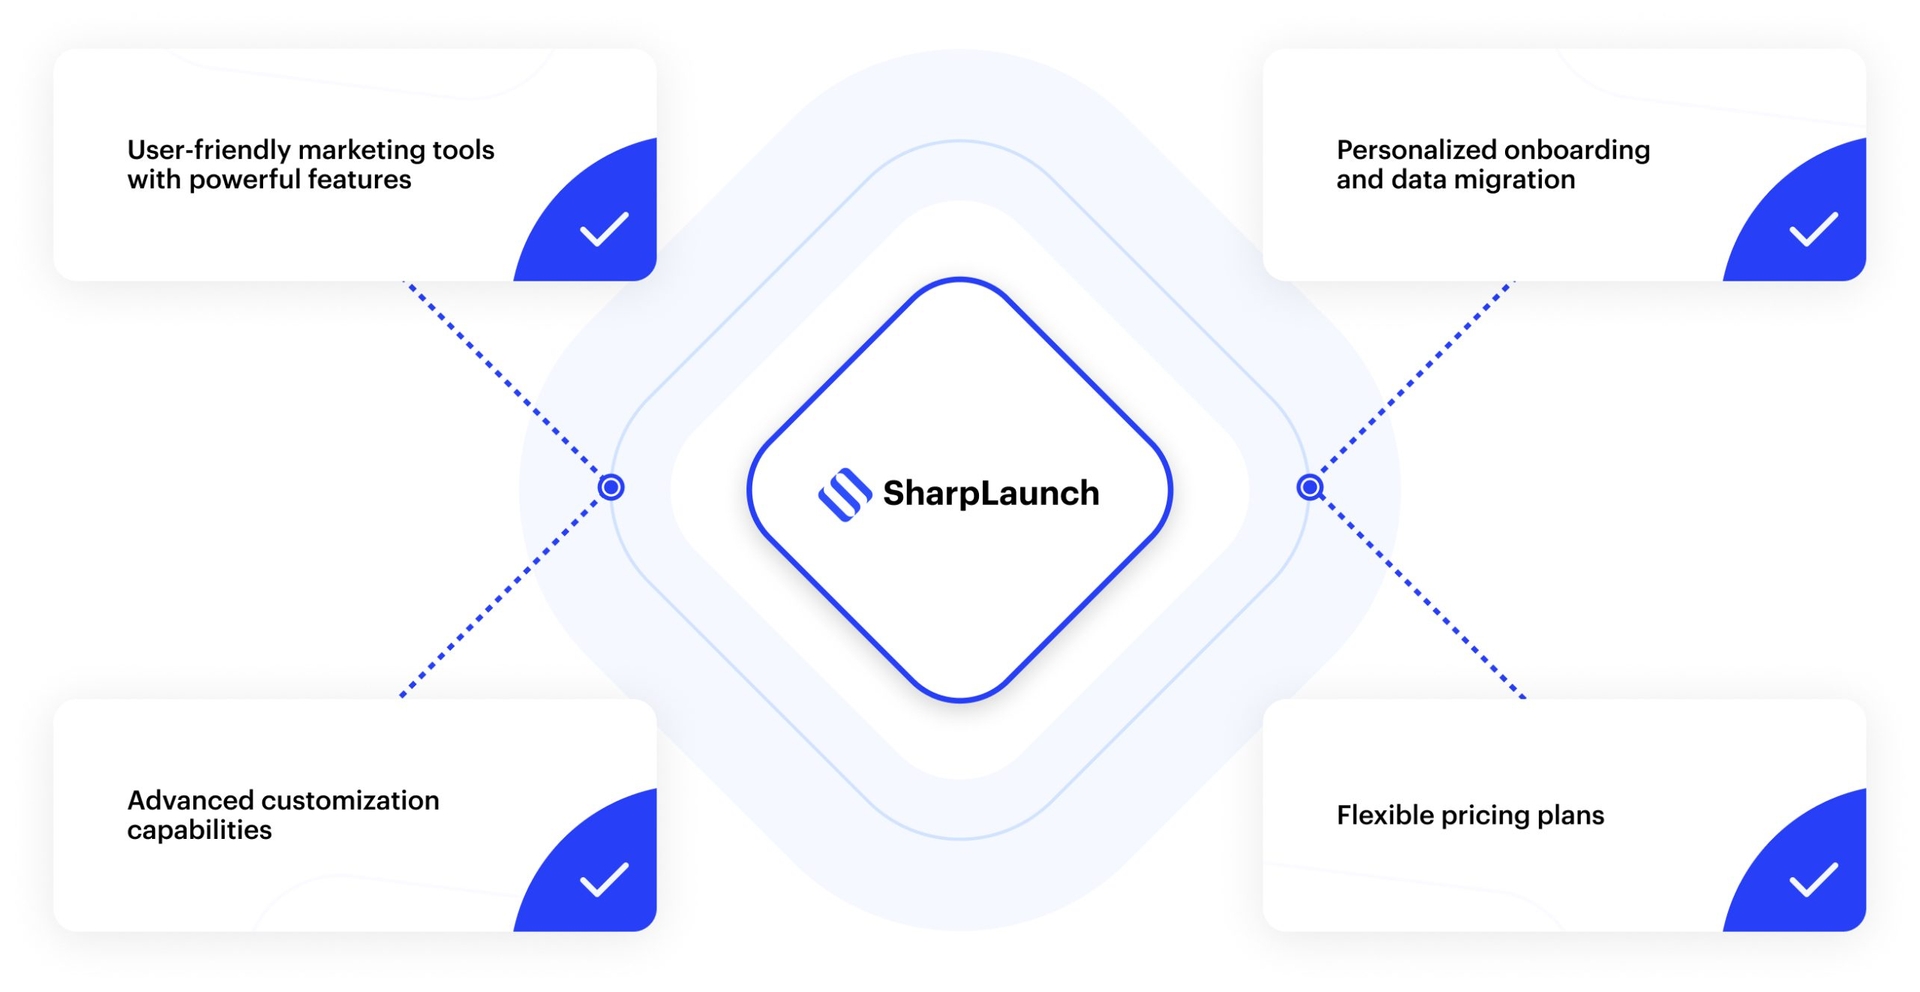 Is SharpLaunch a good fit for my company?